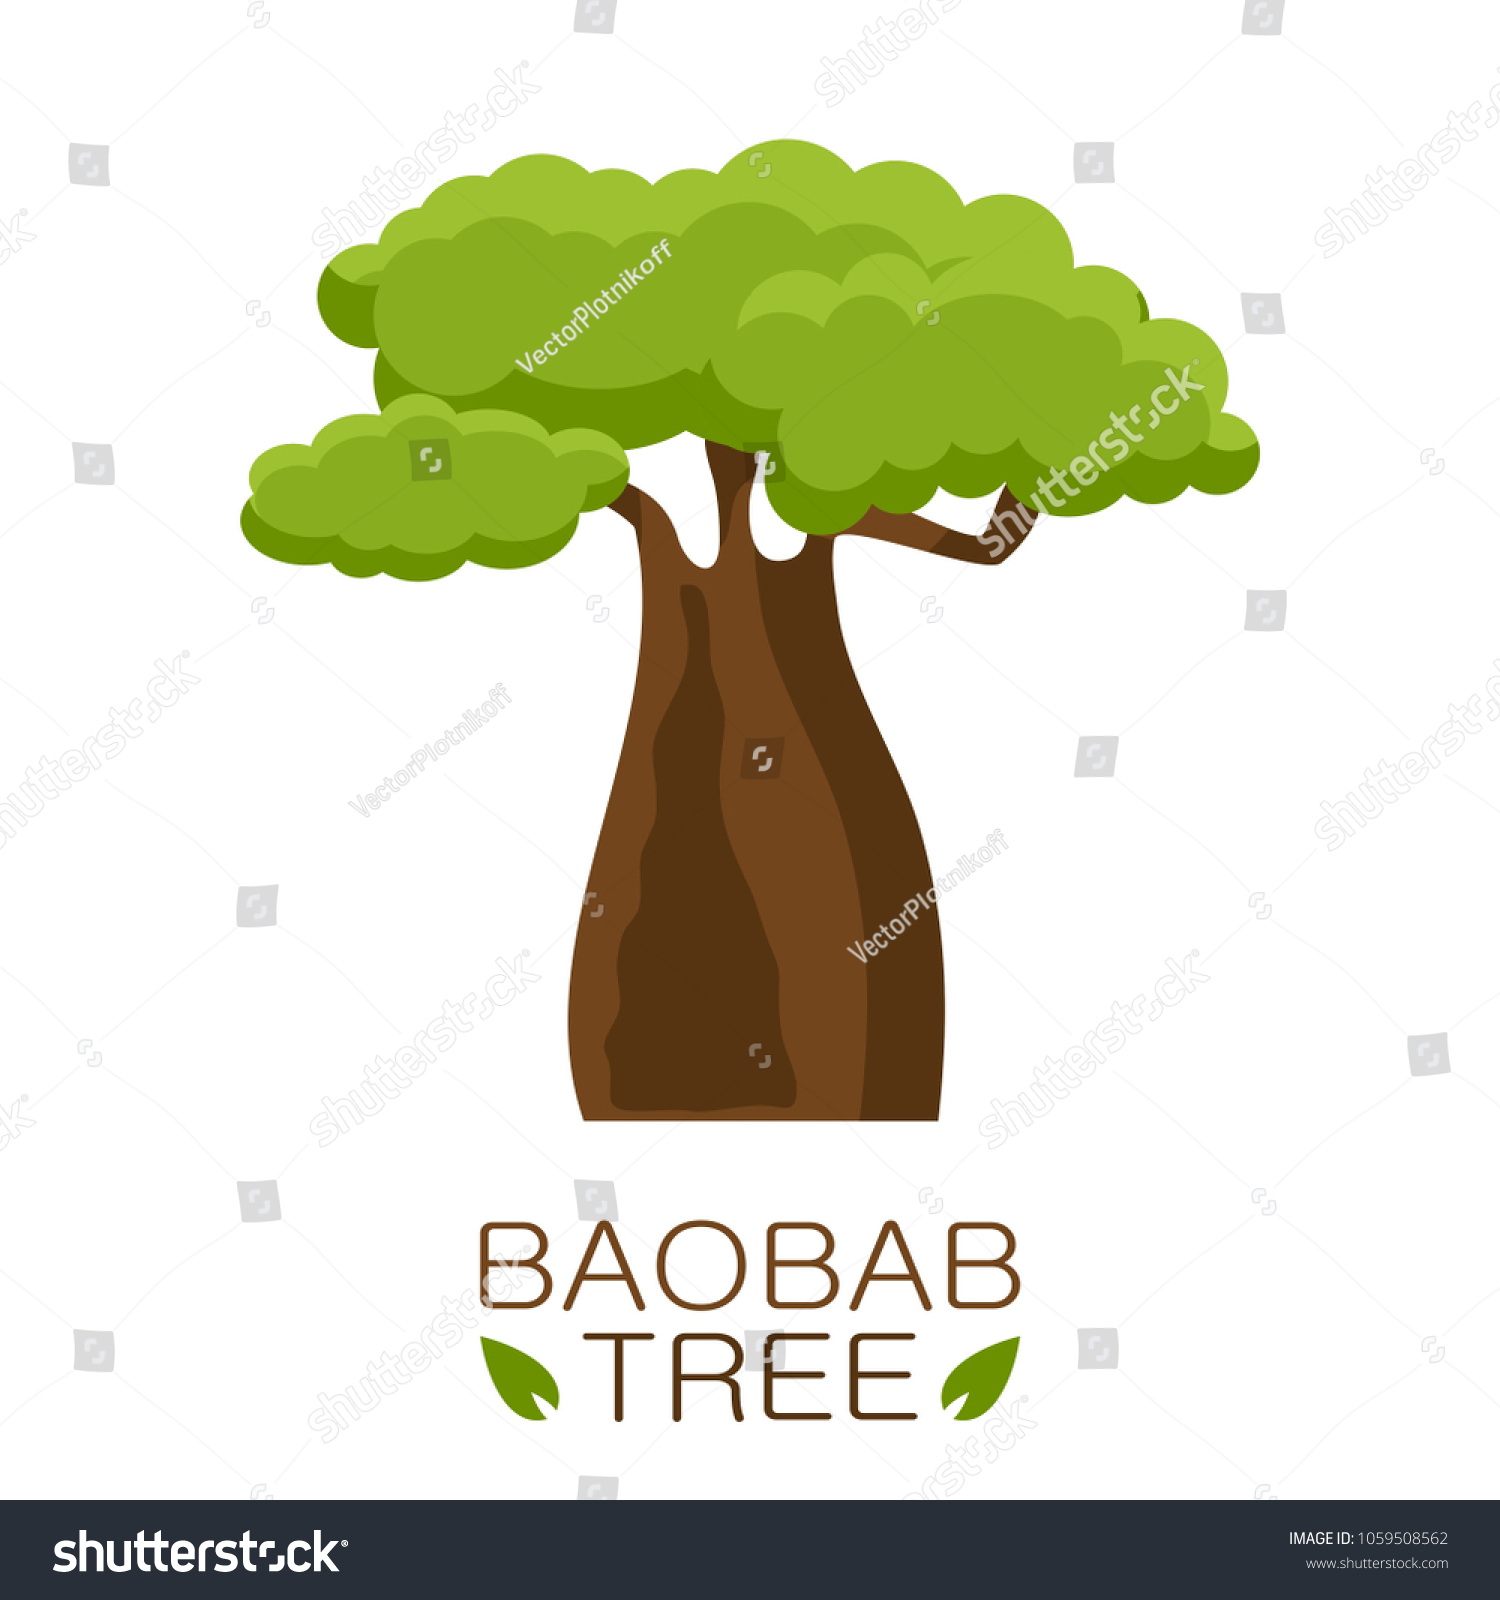 SVG of African Baobab tree icon with text isolated on white background. Vector illustration svg